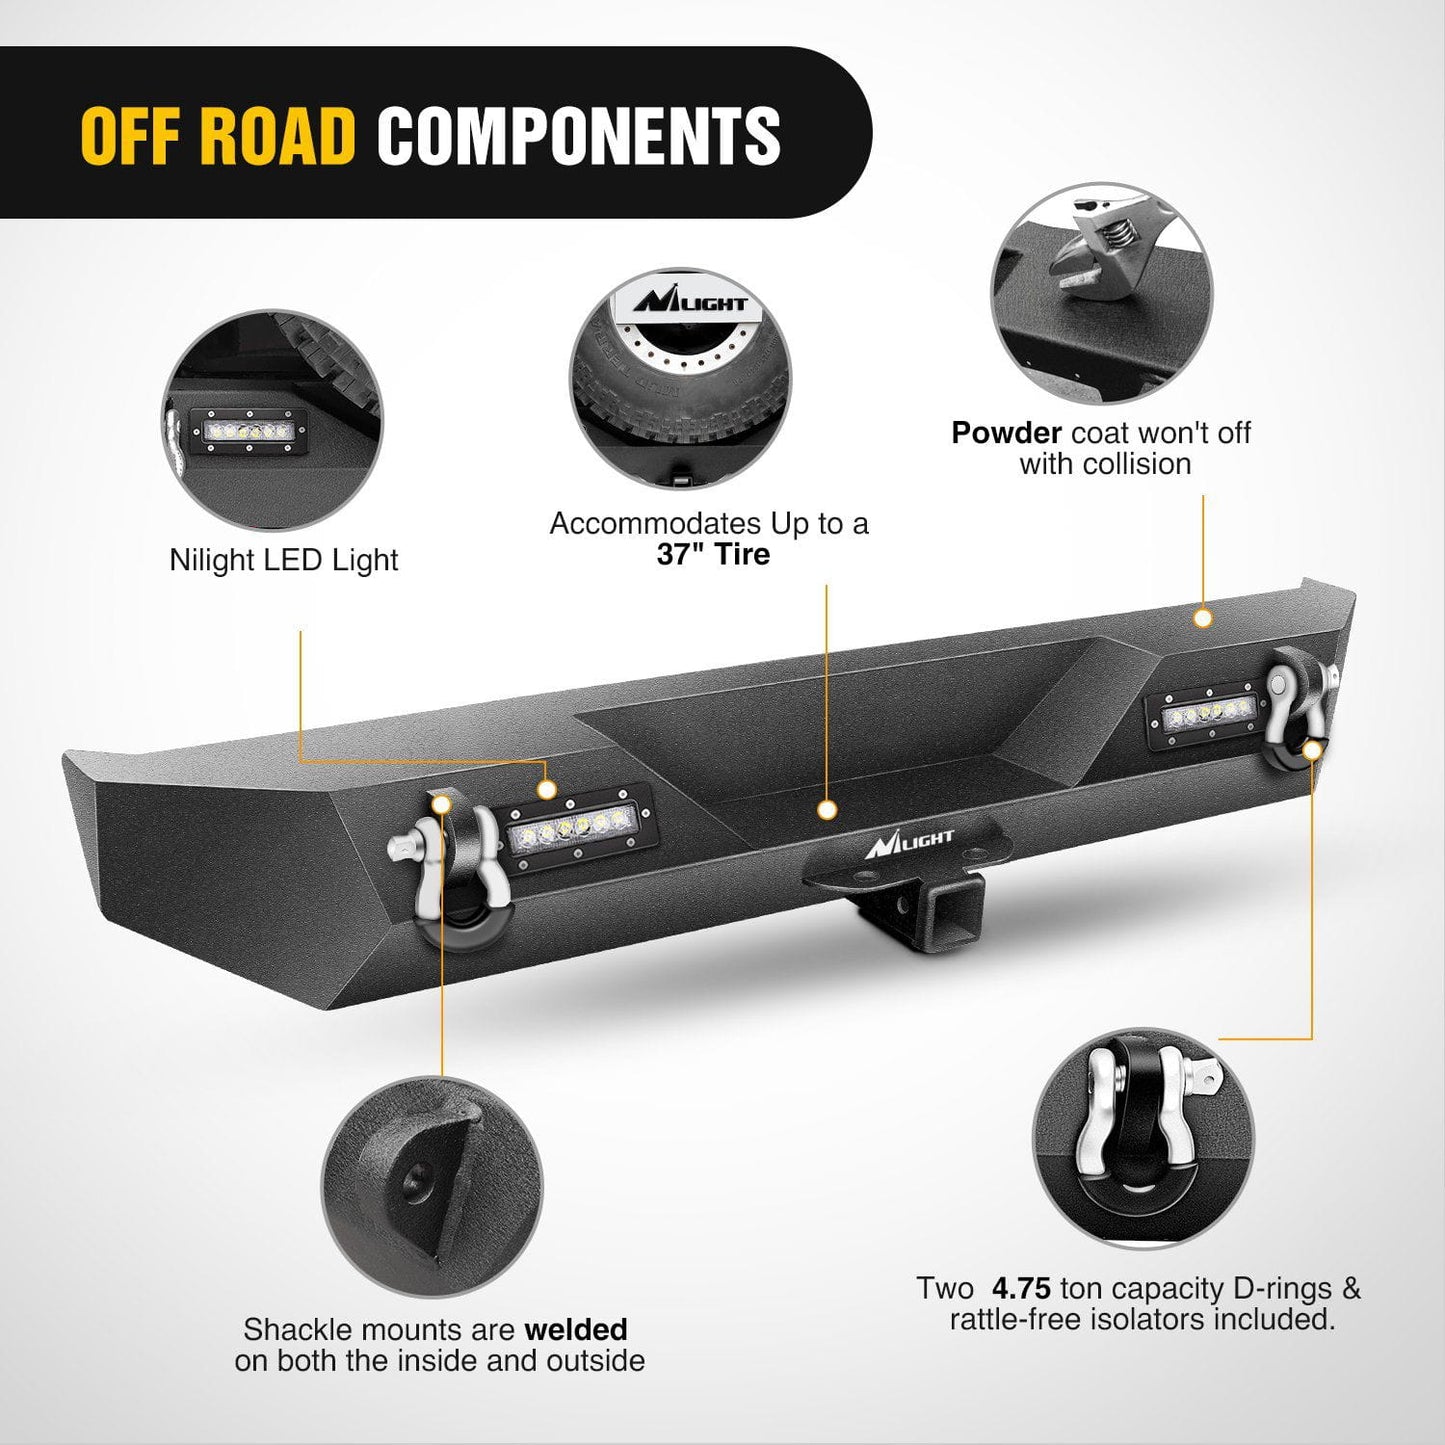 Off Road Components of Nilight Rear Bumper Kit for 1987-2006 Jeep Wrangler TJ & YJ